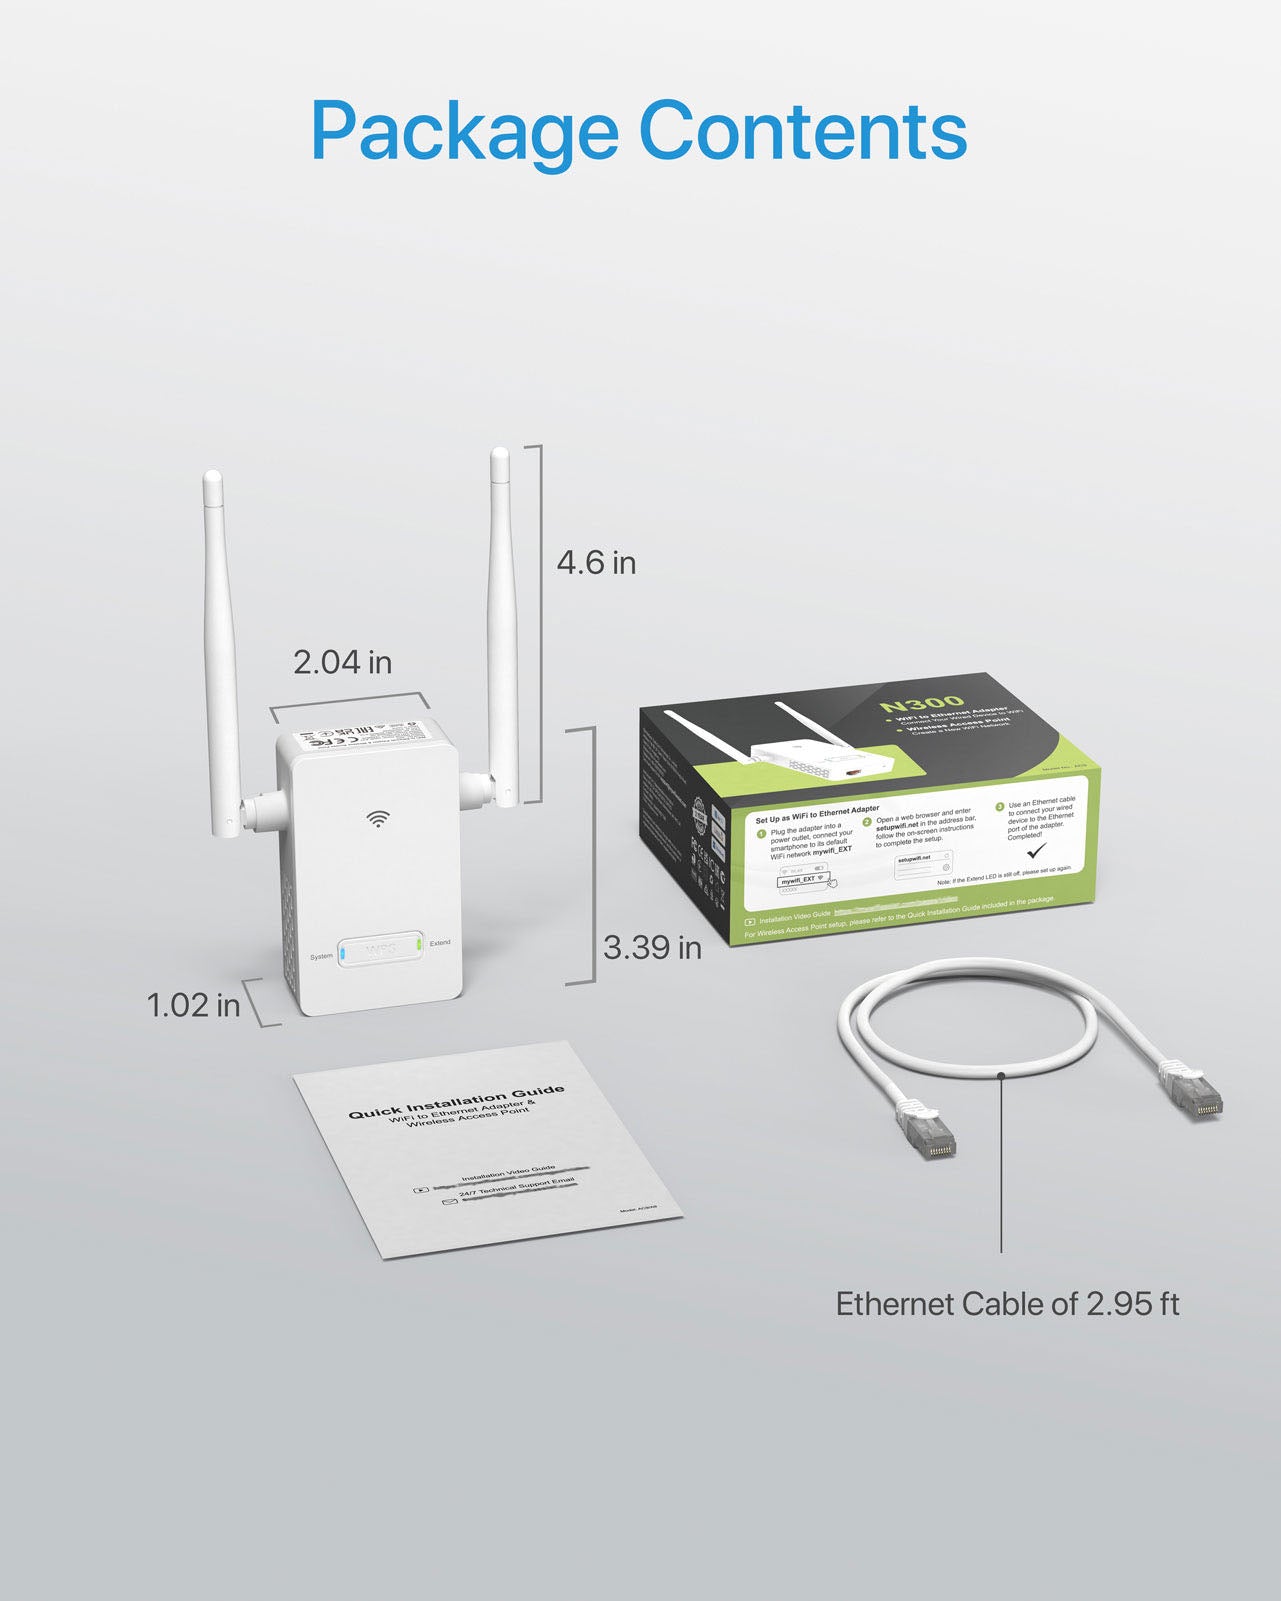 N300 WiFi to Ethernet Adapter, RJ45 Port